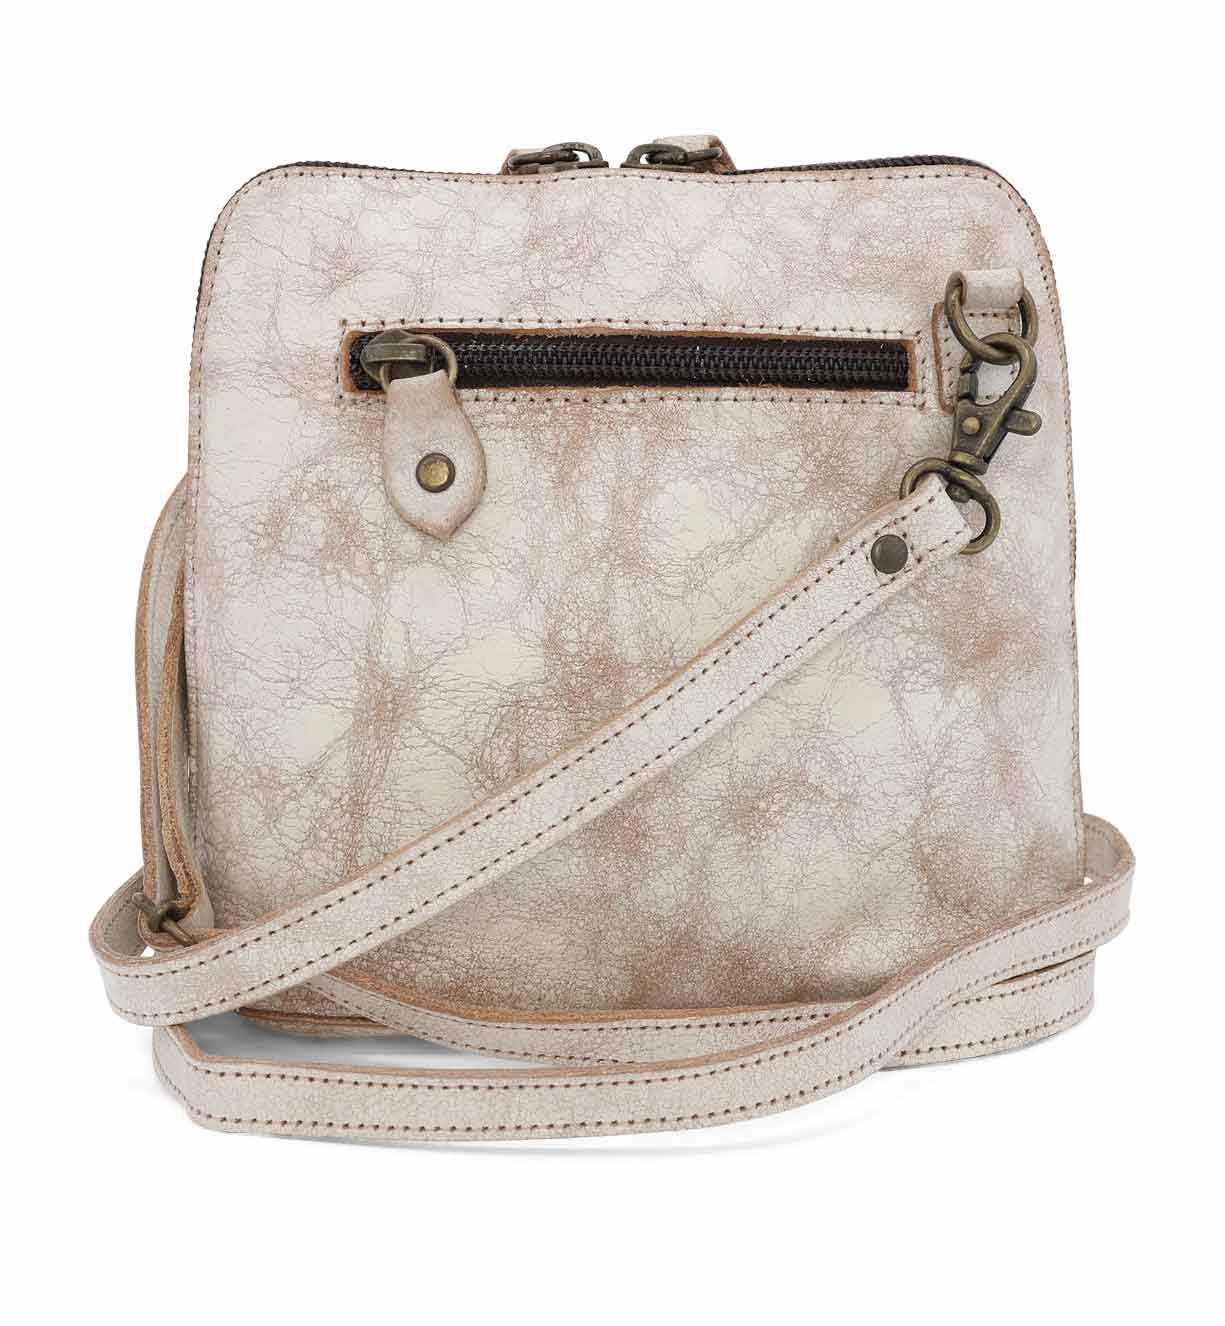 A white leather Bed Stu Ventura cross body bag with a strap.